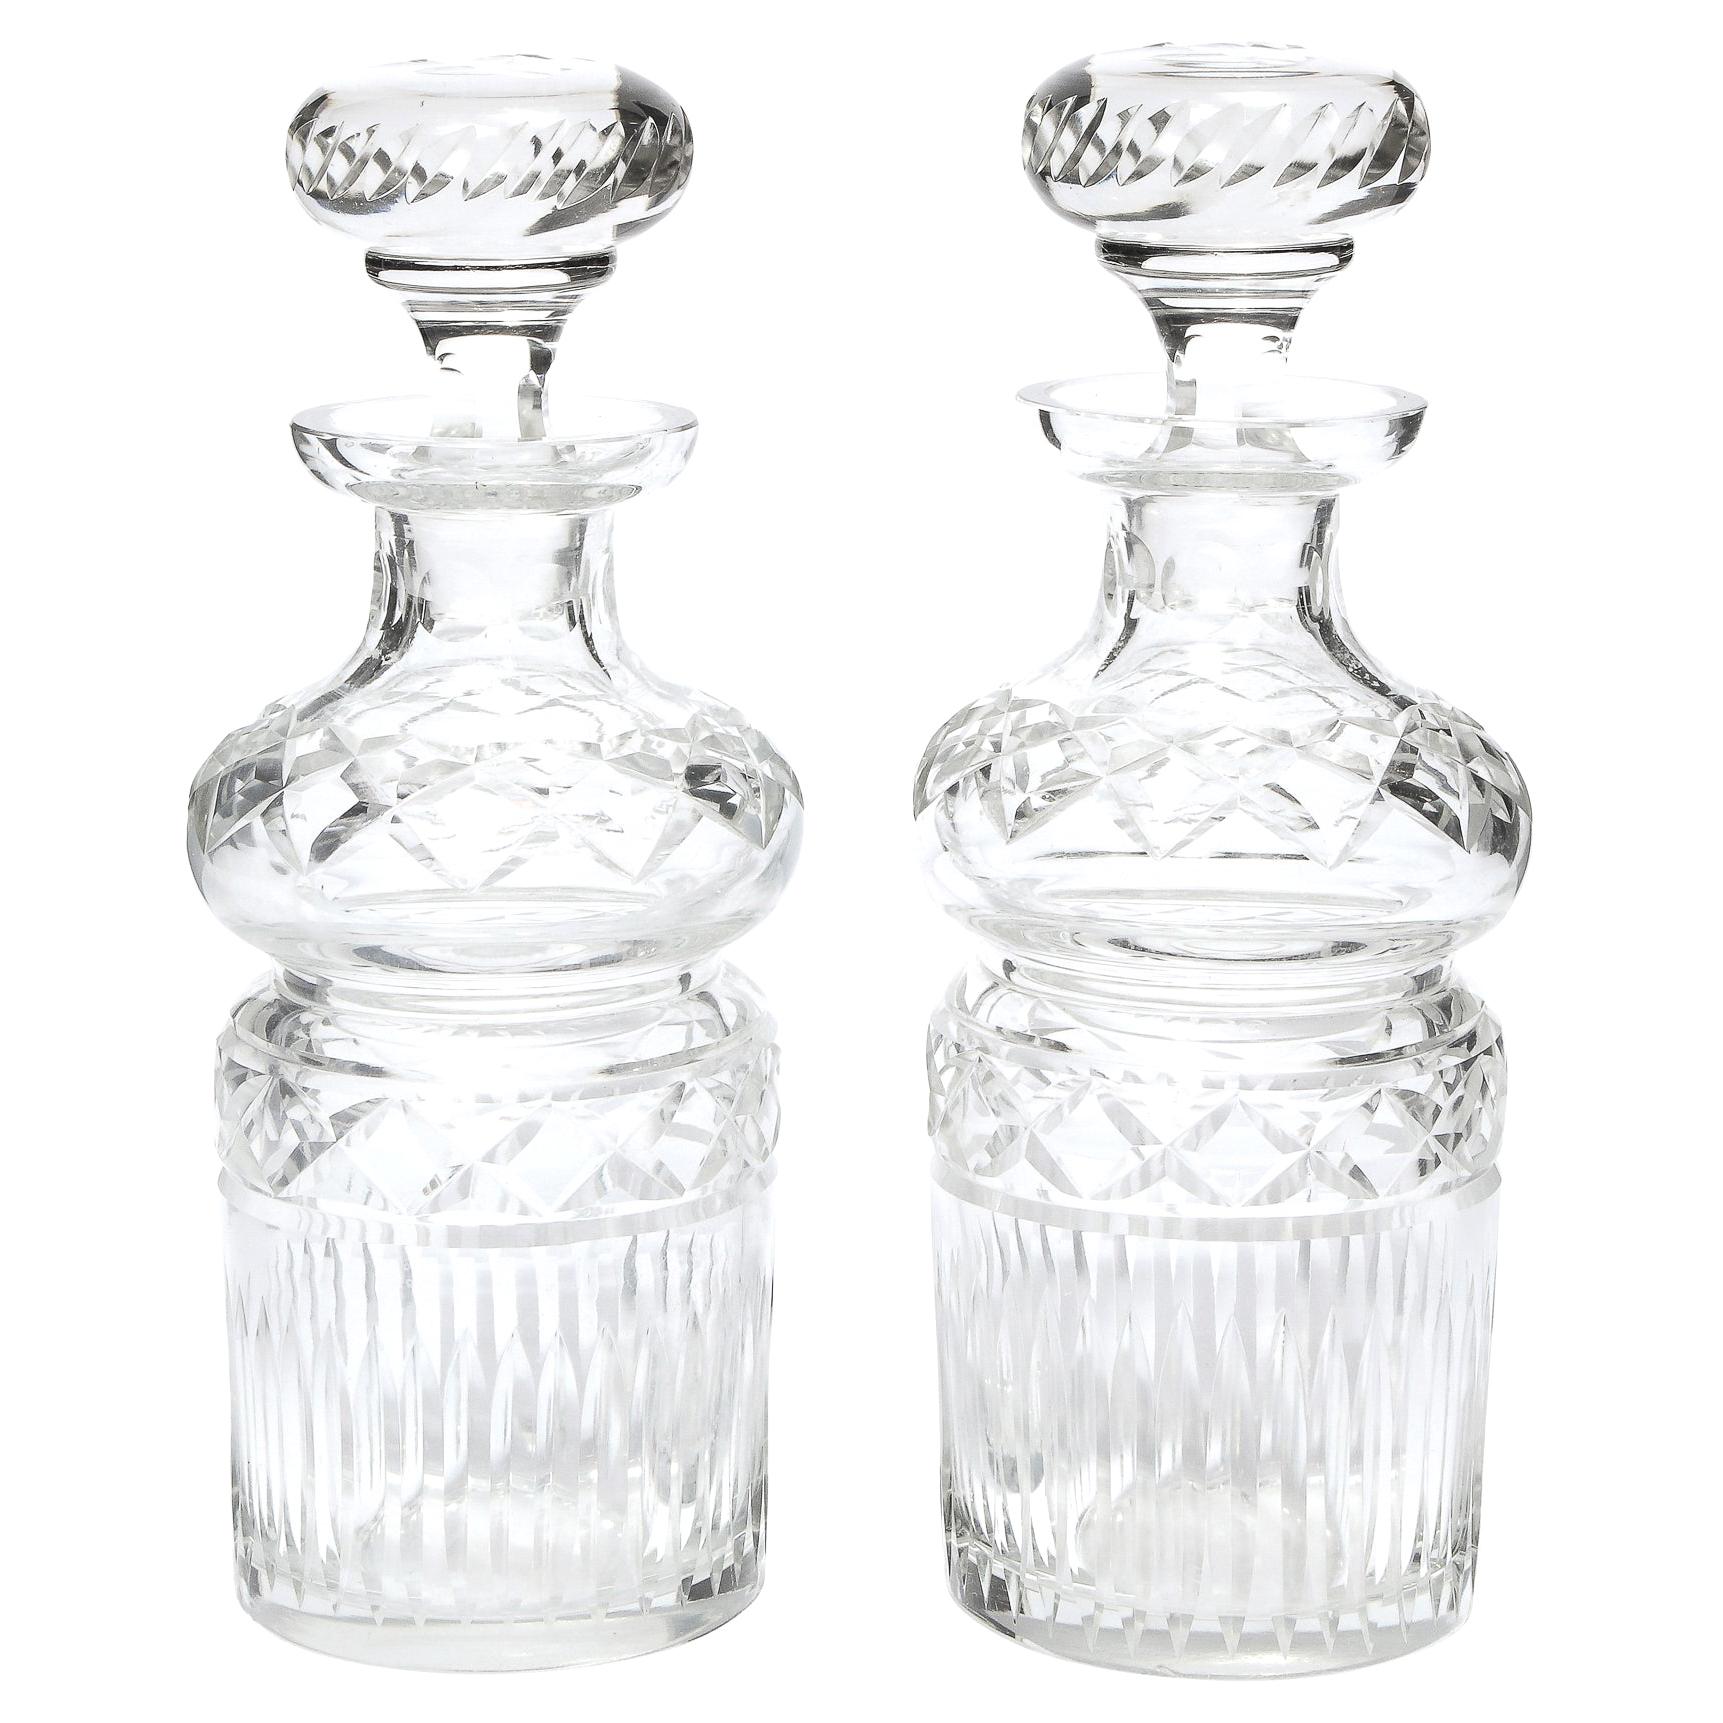 Pair of Mid-Century Modern Etched Translucent Crystal Decanters